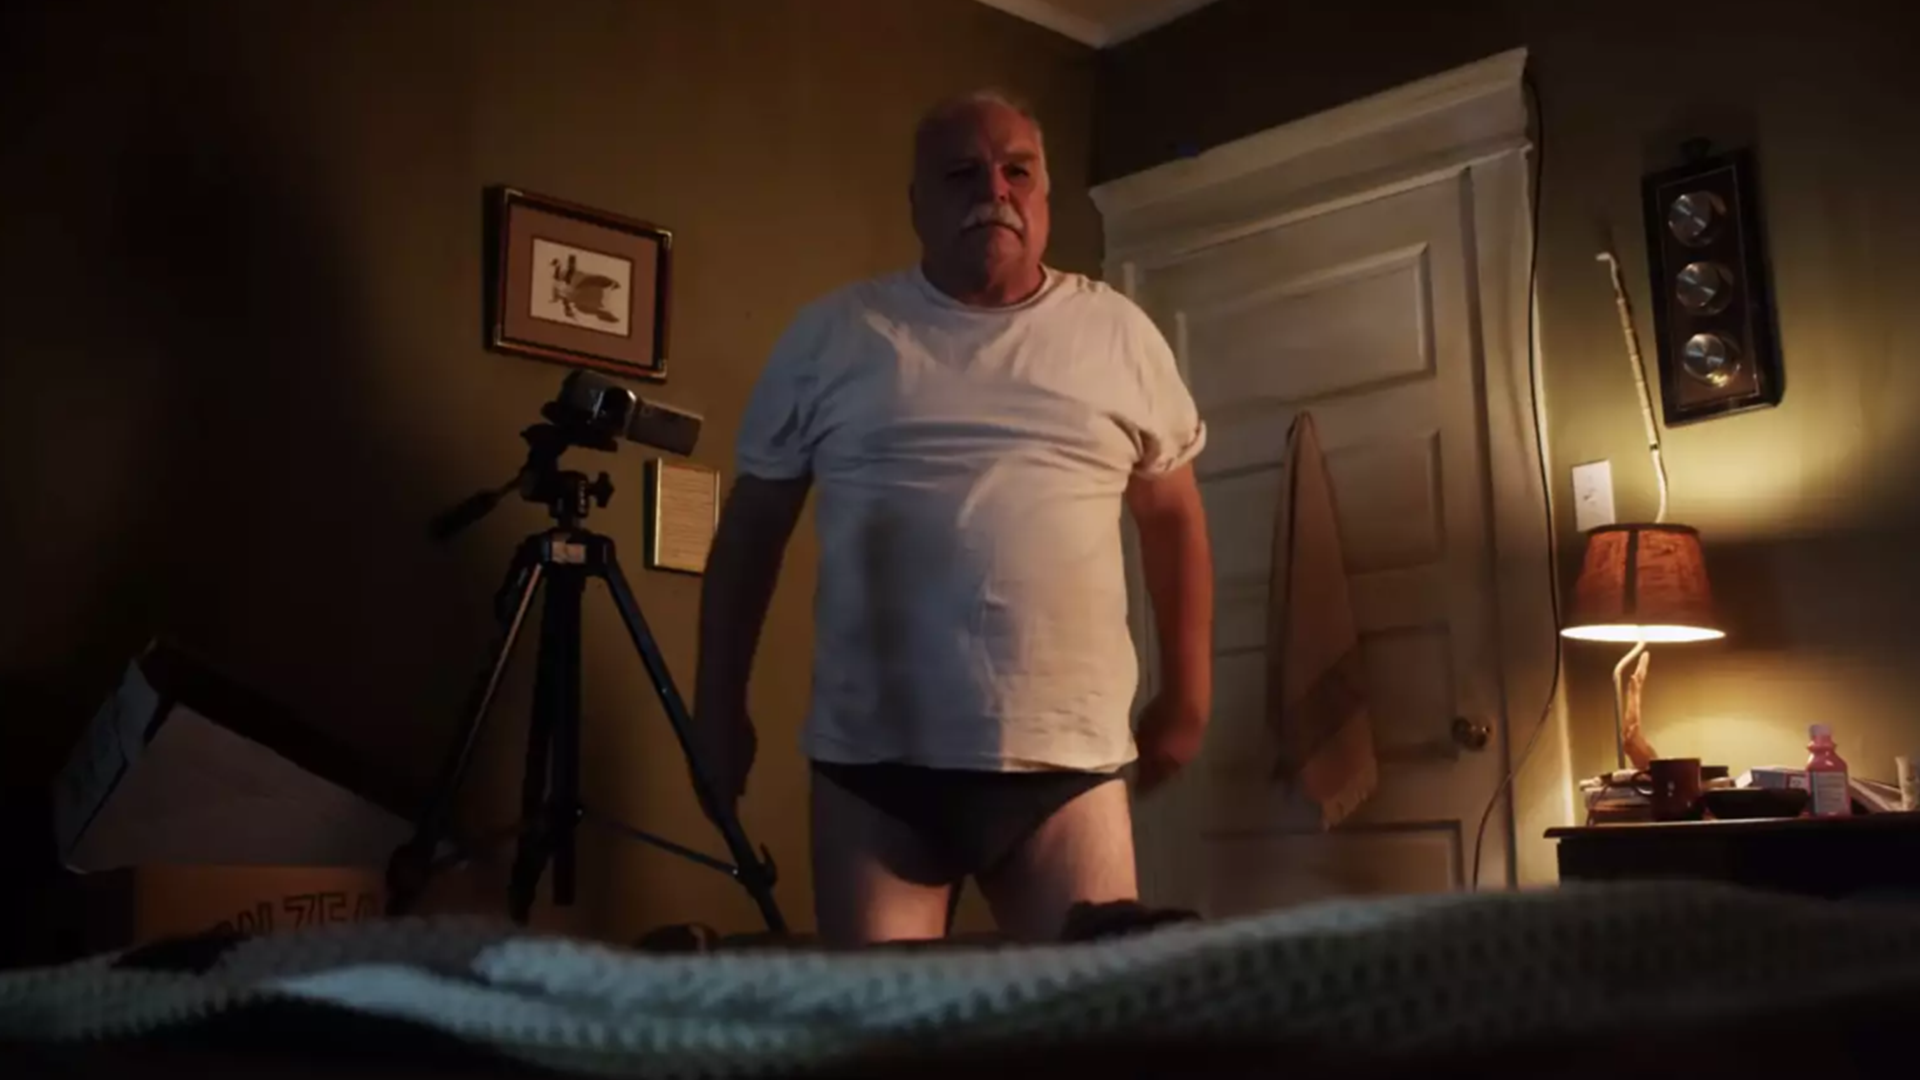 A man stands in a bedroom wearing a white T-shirt and underwear with a camera tripod next to him in this image from Independent.